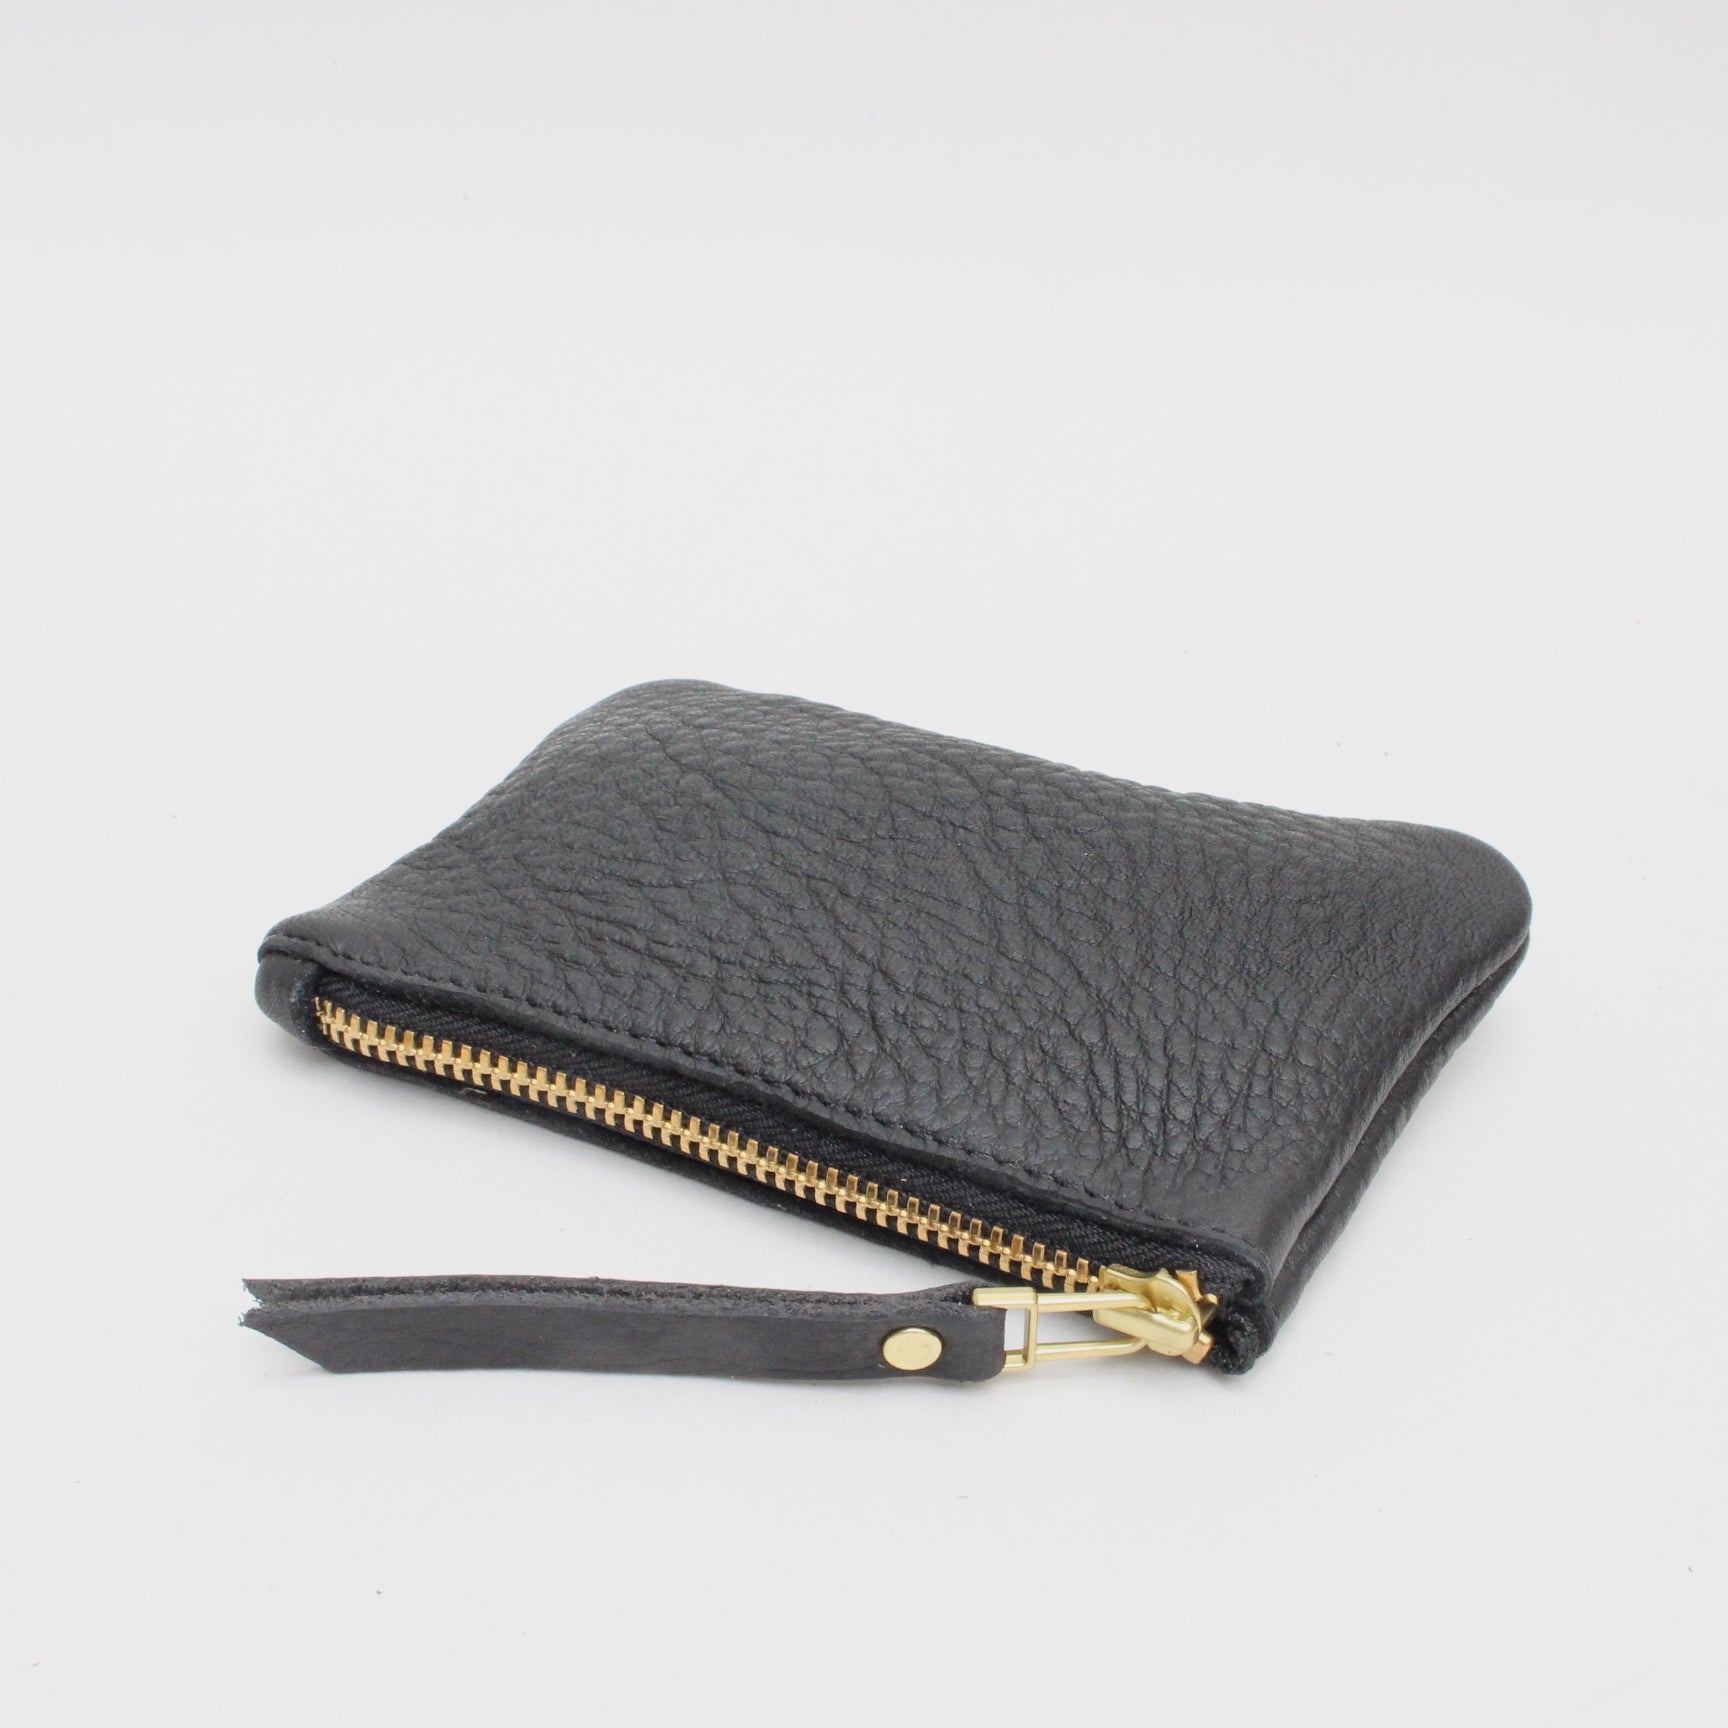 Foxcombe Coin Purse - Black Leather